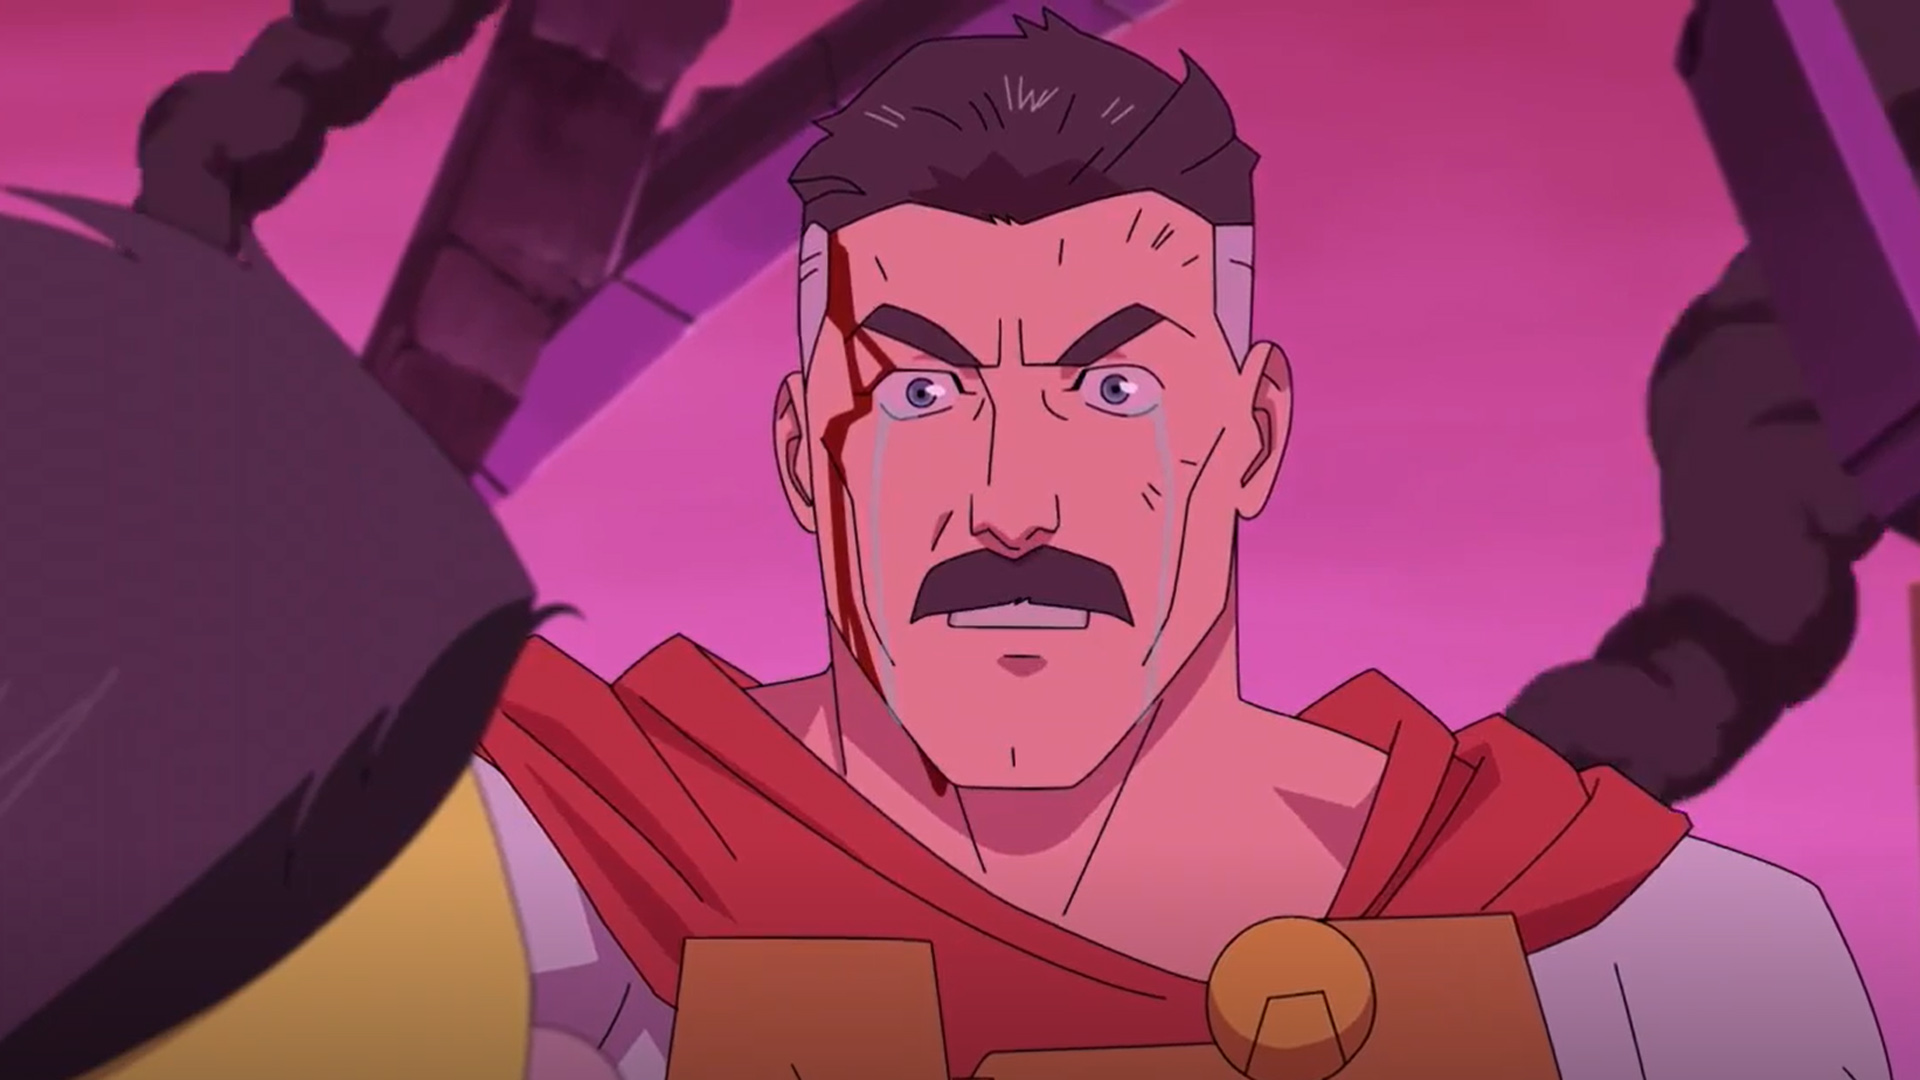 Invincible Season 2, Episode 4 Review – “It's Been a While”